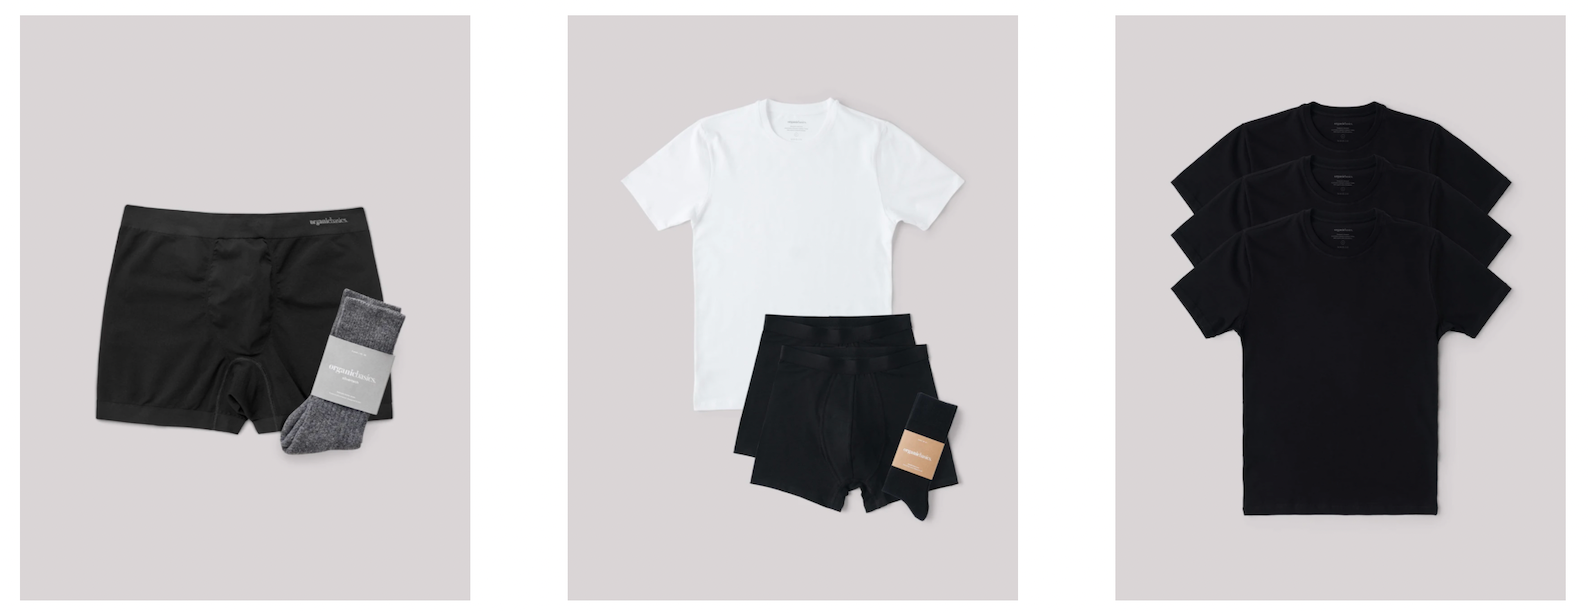 Organic Basics clothing featuring boxers, socks, and t-shirts, both black and white.